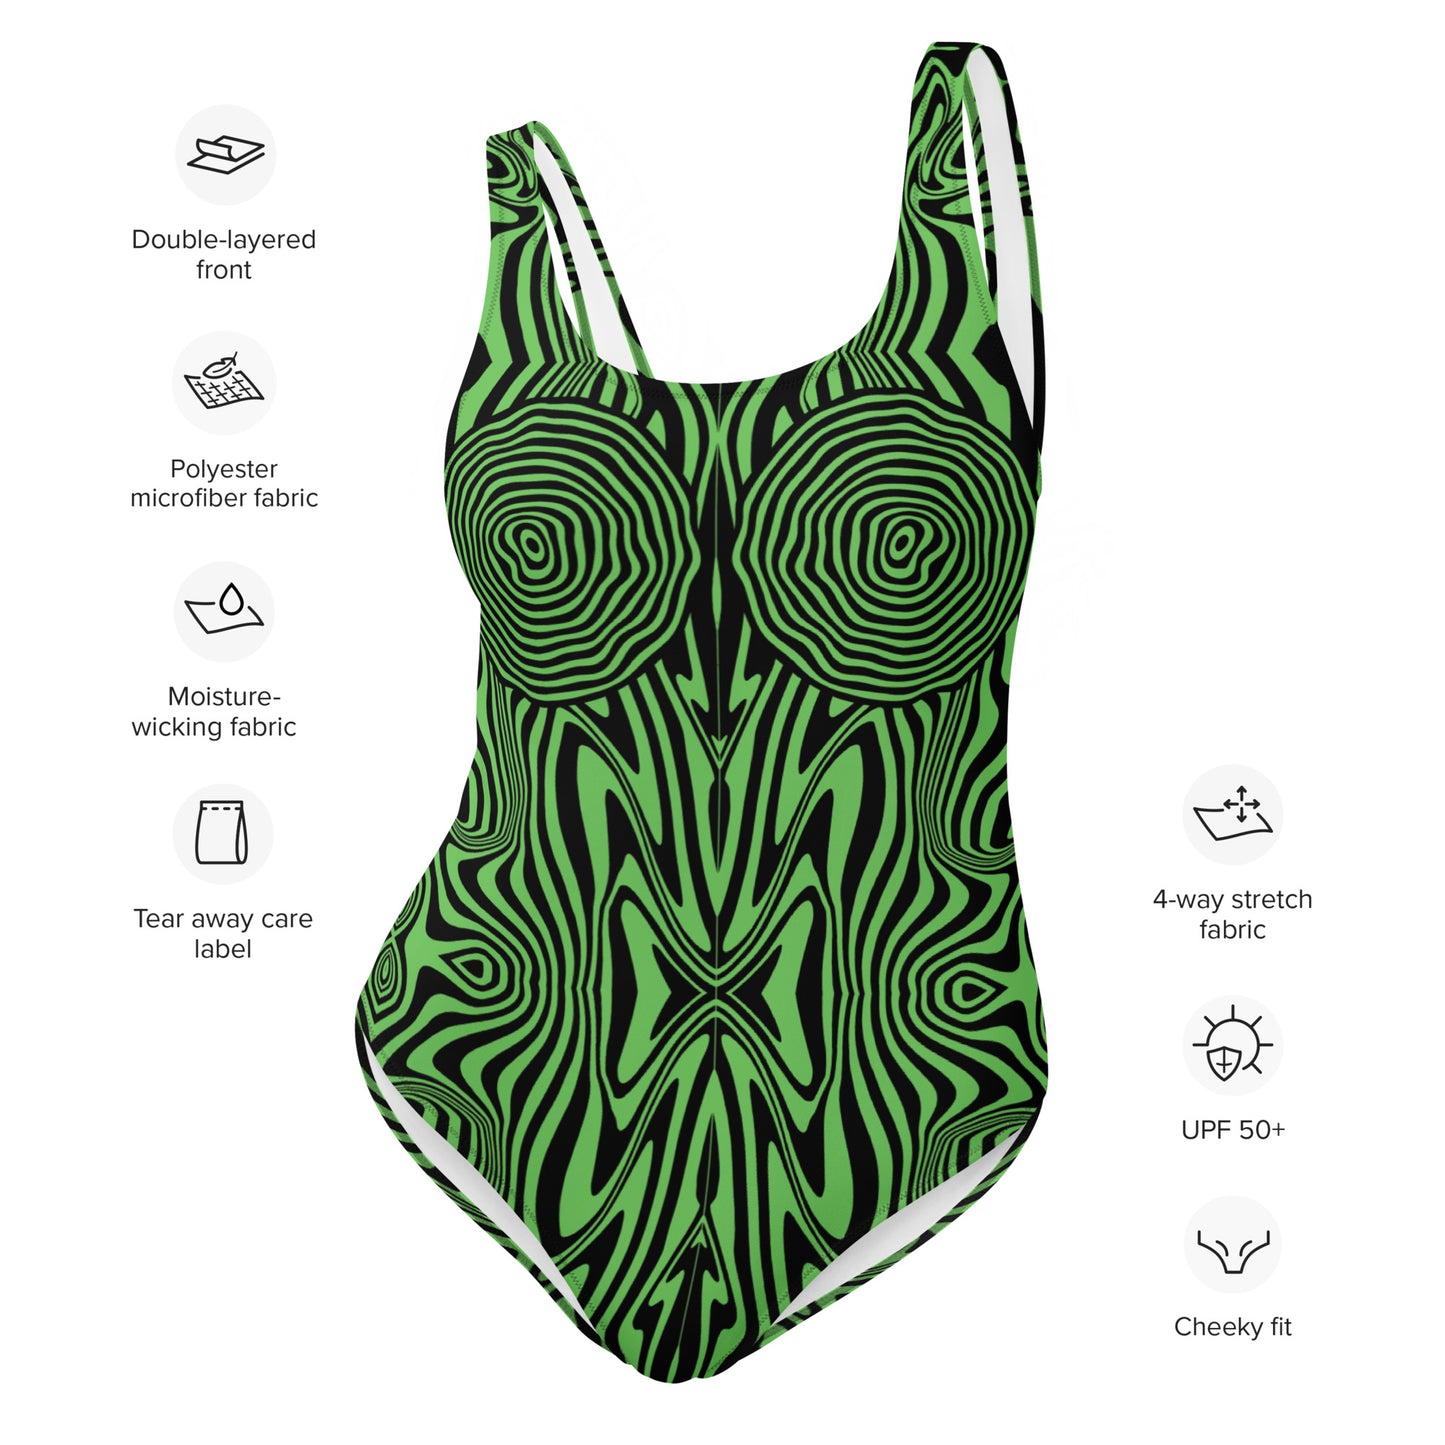 DYSTOPIA (One-Piece Swimsuit)